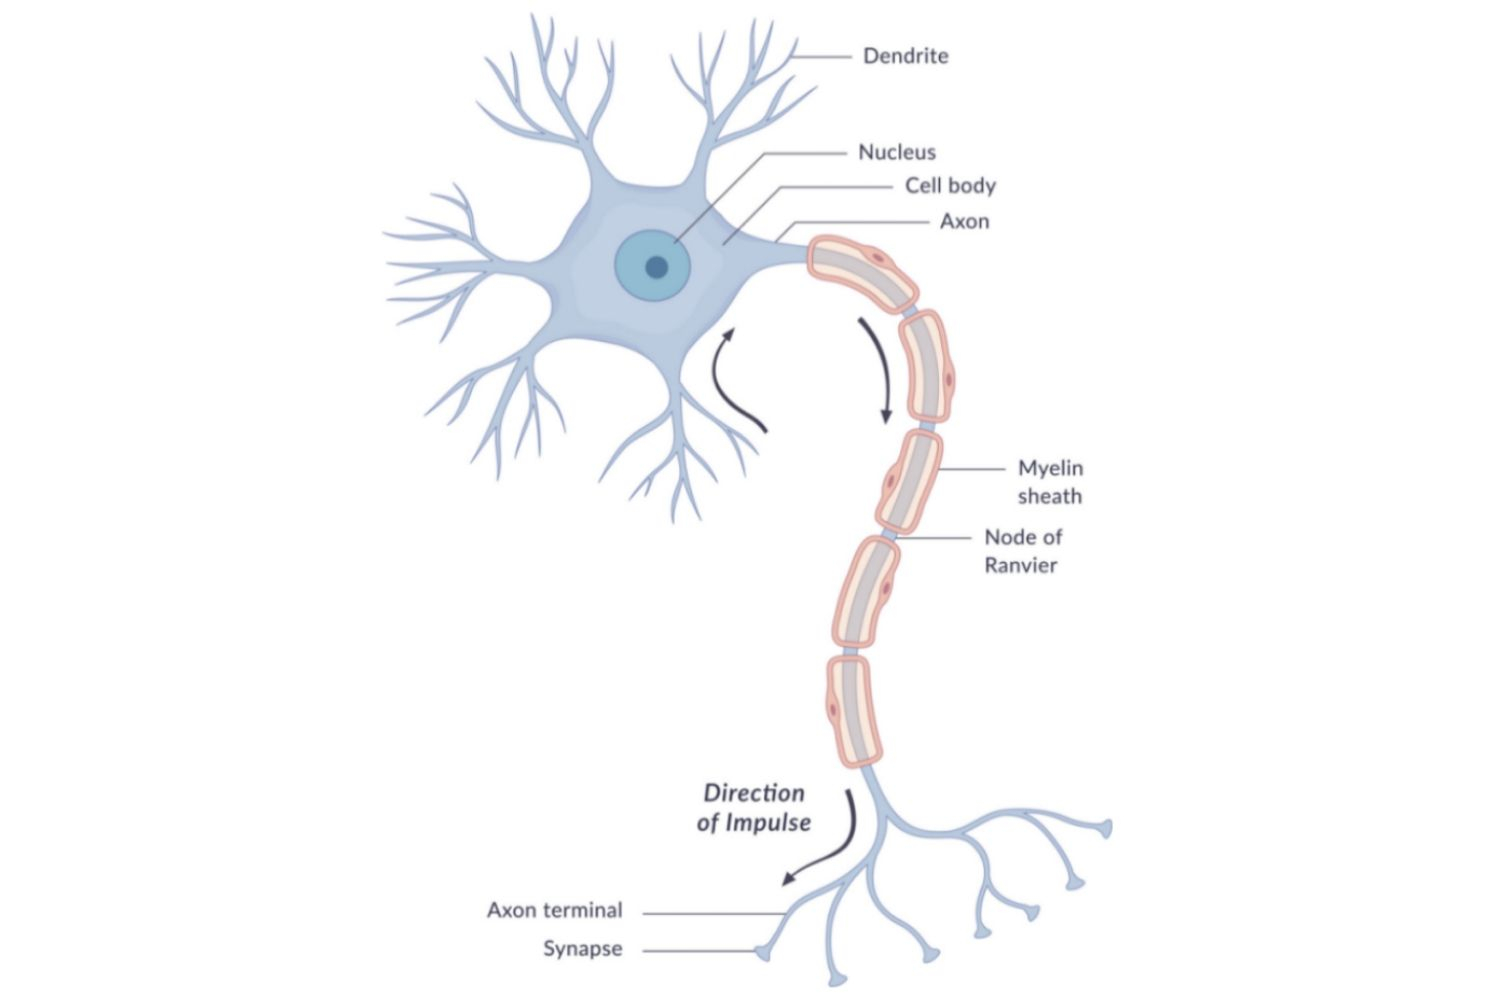 Nerve Cell Diagram Neuron Anatomy Nerve Impulses And Classifications